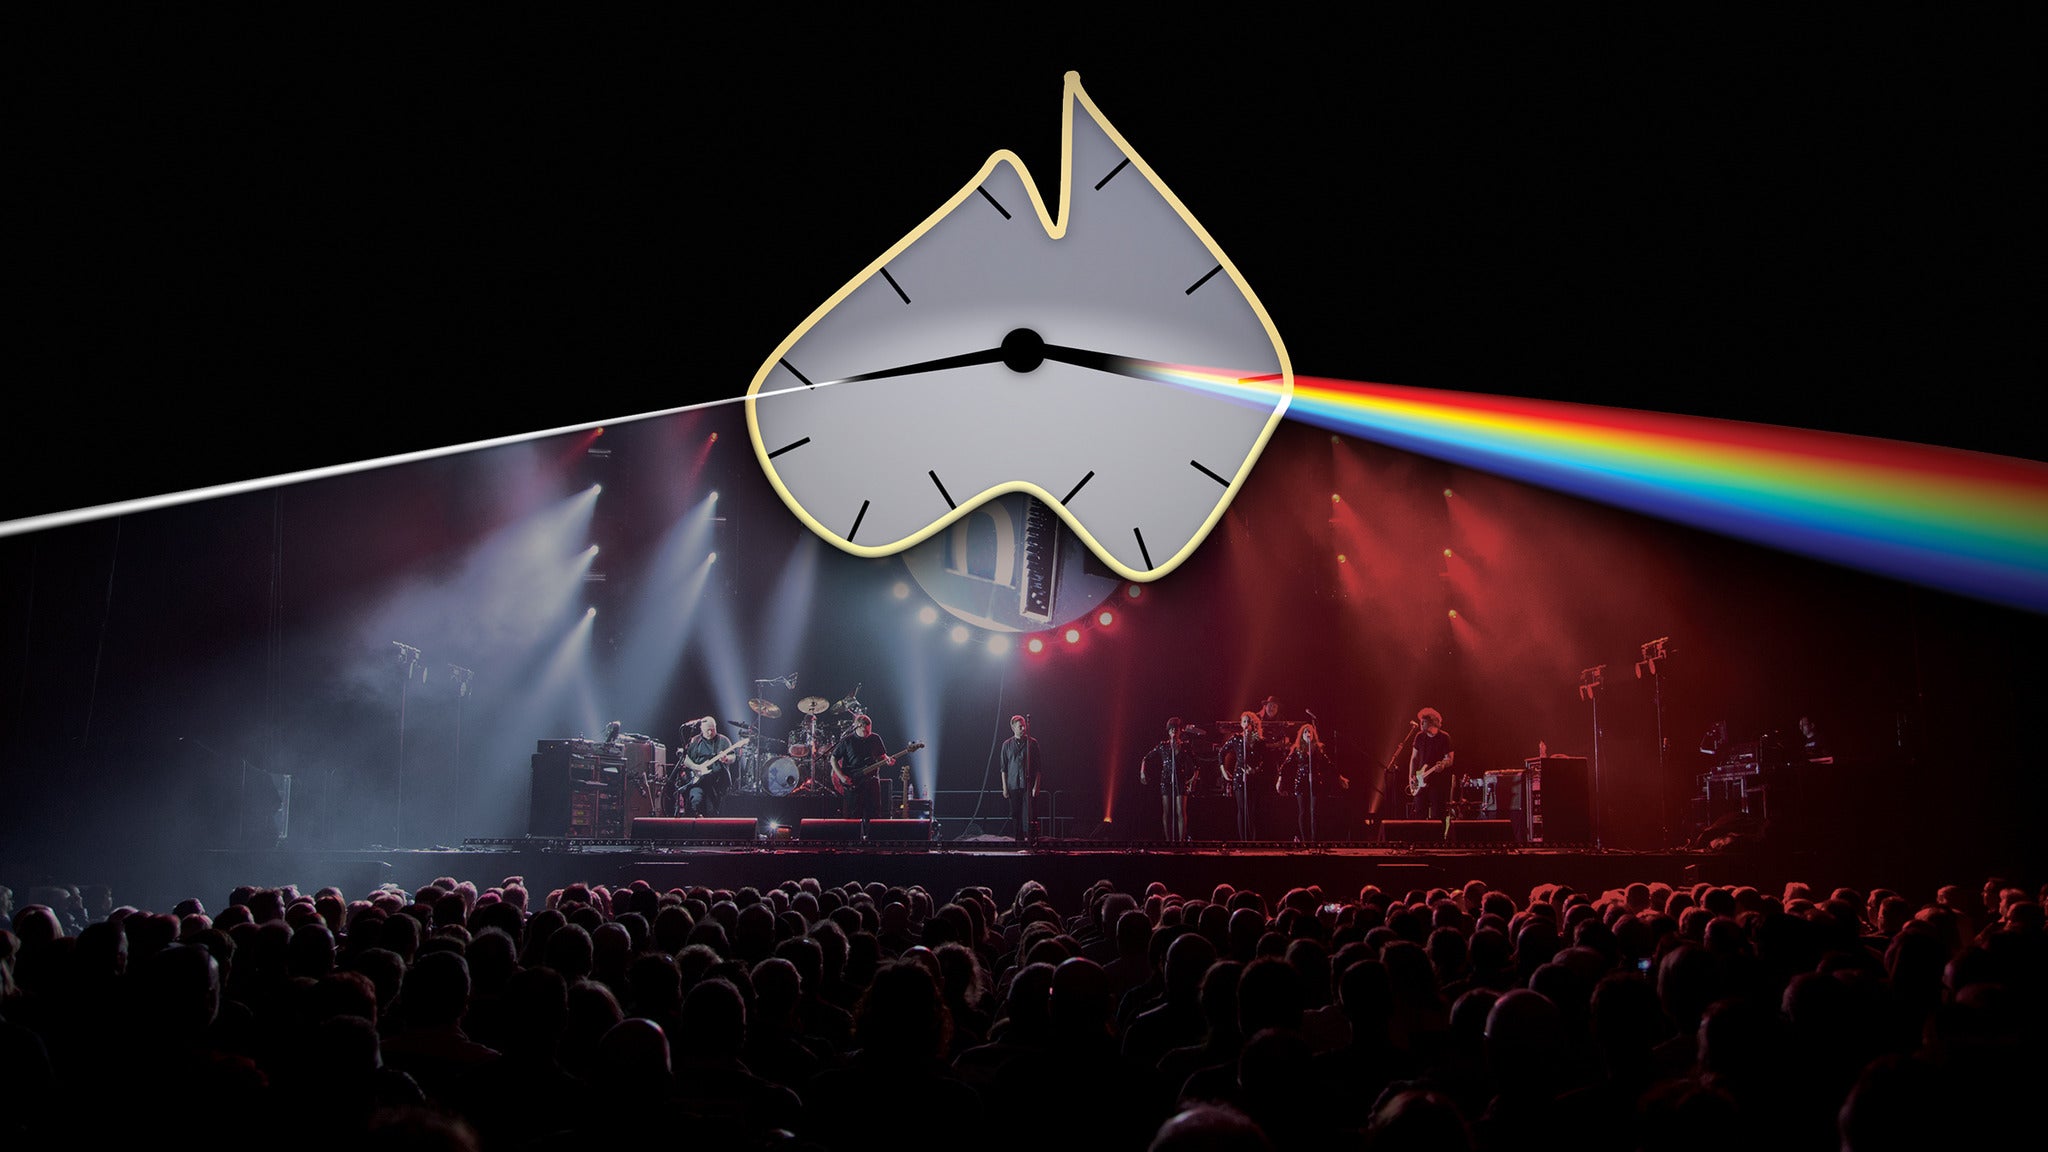 The Australian Pink Floyd Show - All That You Love Tour 2019